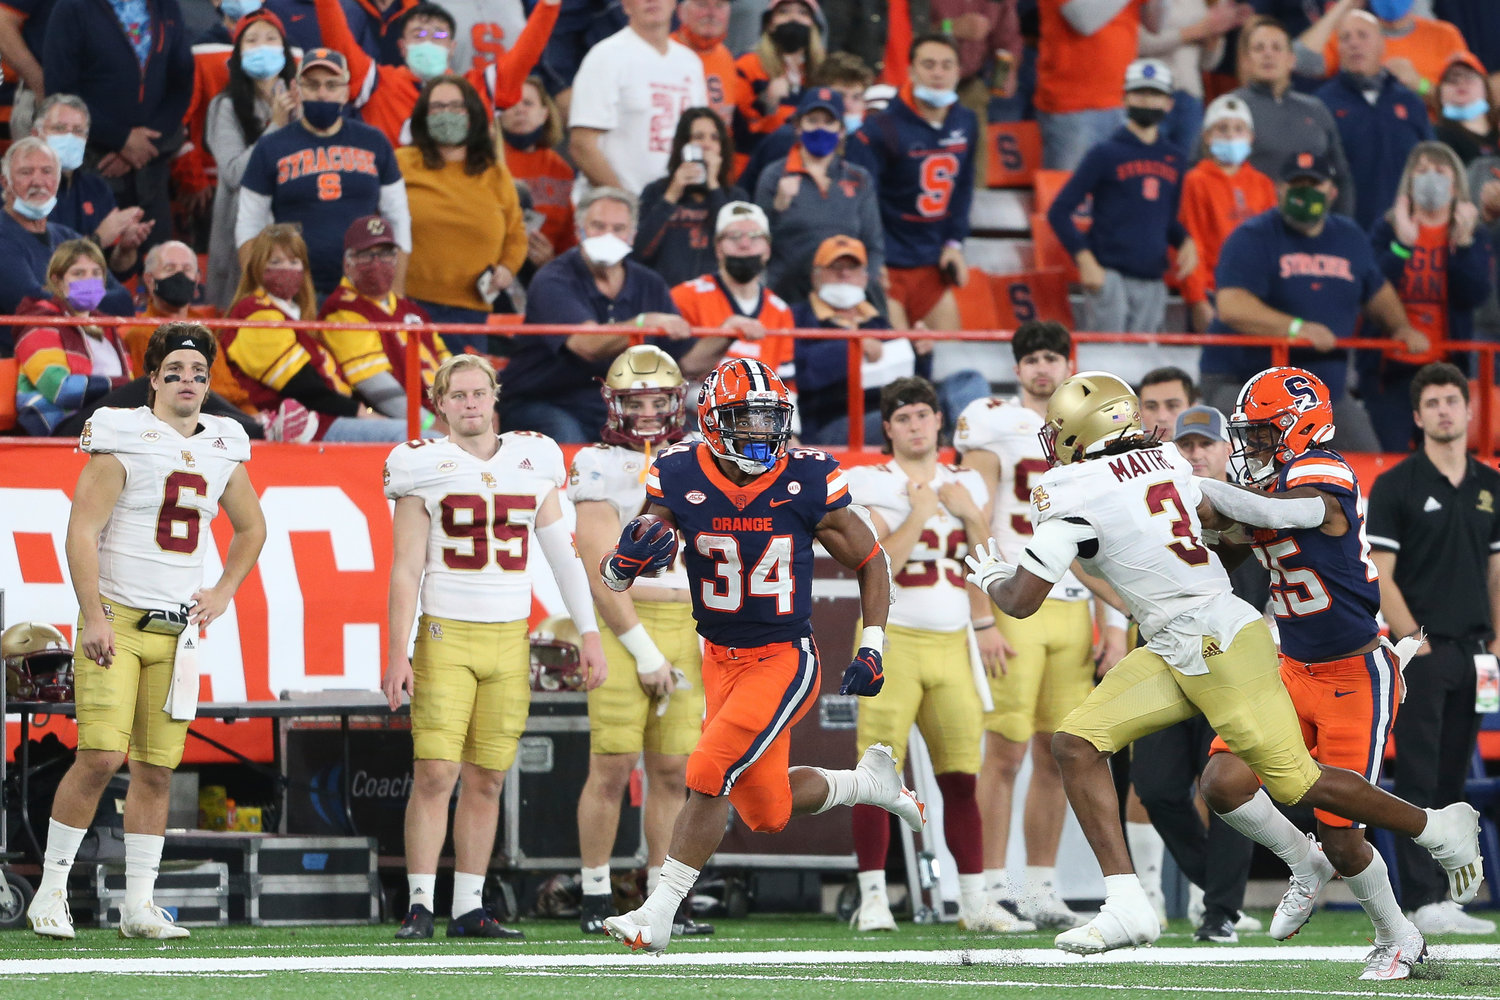 DOWN THE SIDELINE — Syracuse running back Sean Tucker (34) is chased by Boston College defensive back Jason Maitre (3) while running during the second half of an NCAA football game in Syracuse, N.Y., Saturday, Oct. 30. Tucker believes he’ll be back in Central New York next season.